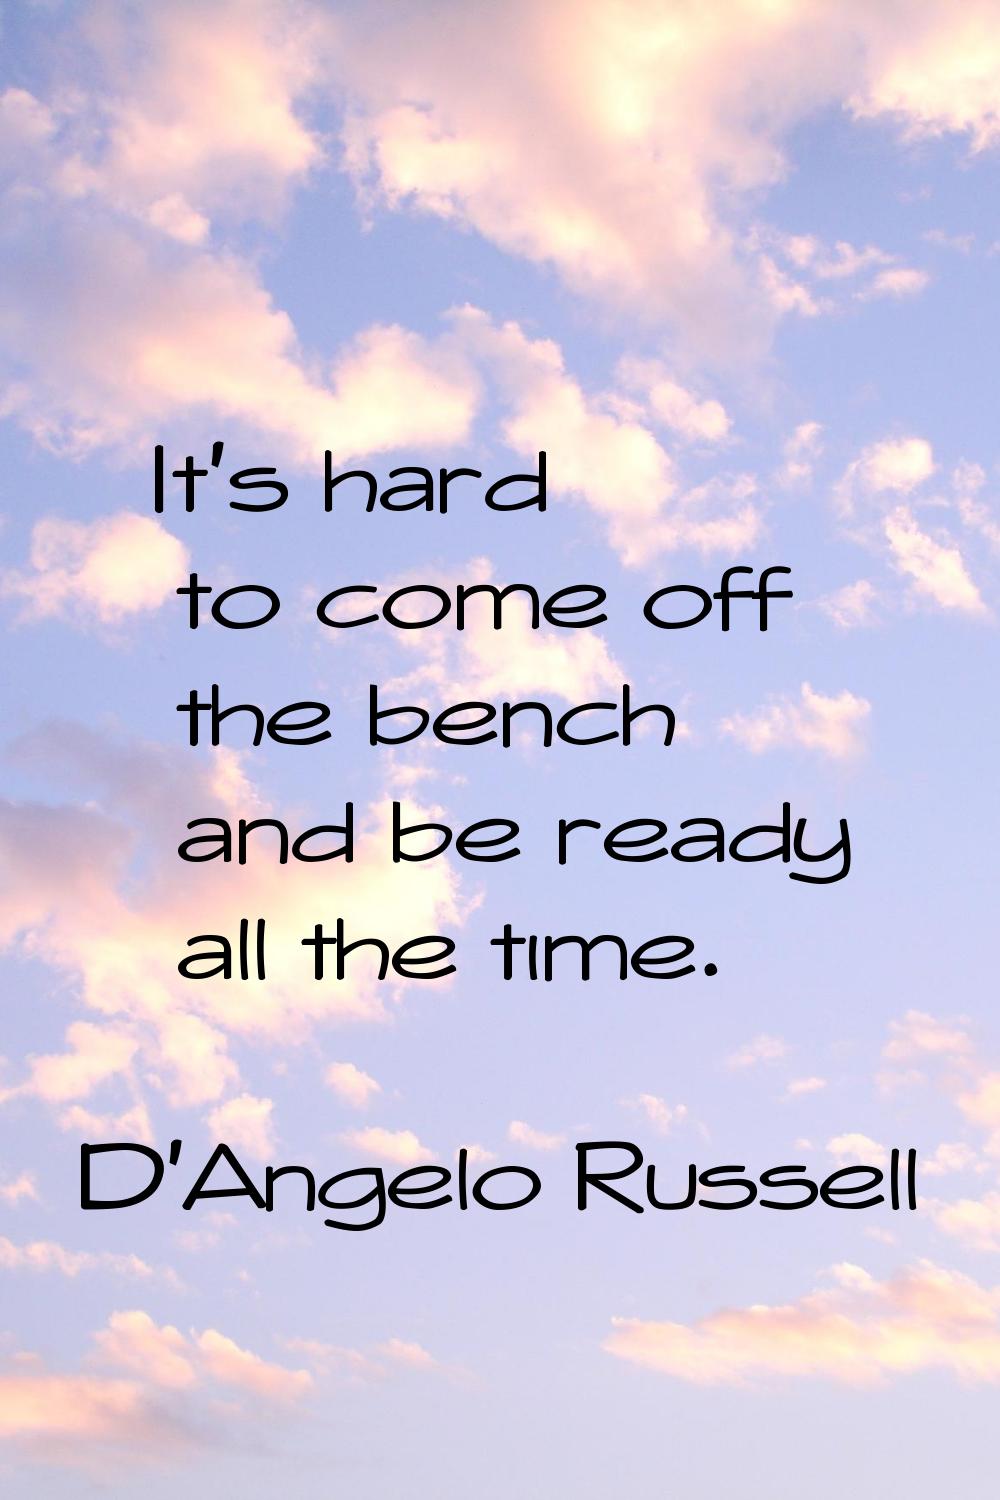 It's hard to come off the bench and be ready all the time.